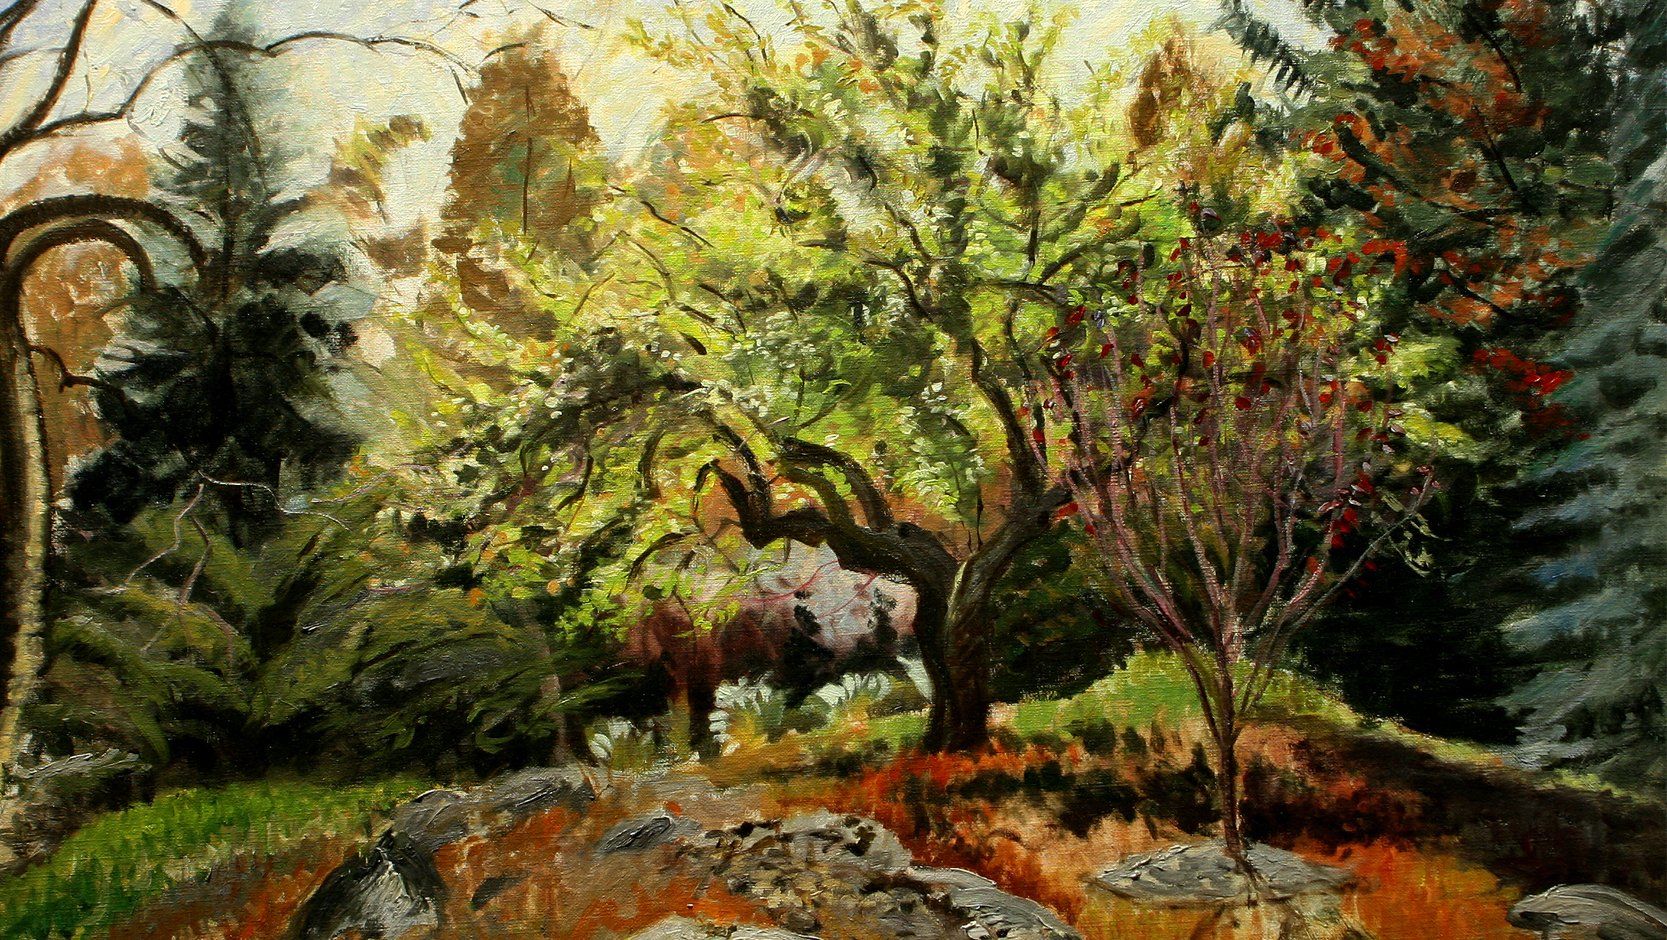 J. Varriano, American Artist Landscape Oil Painting: Apple Blossom